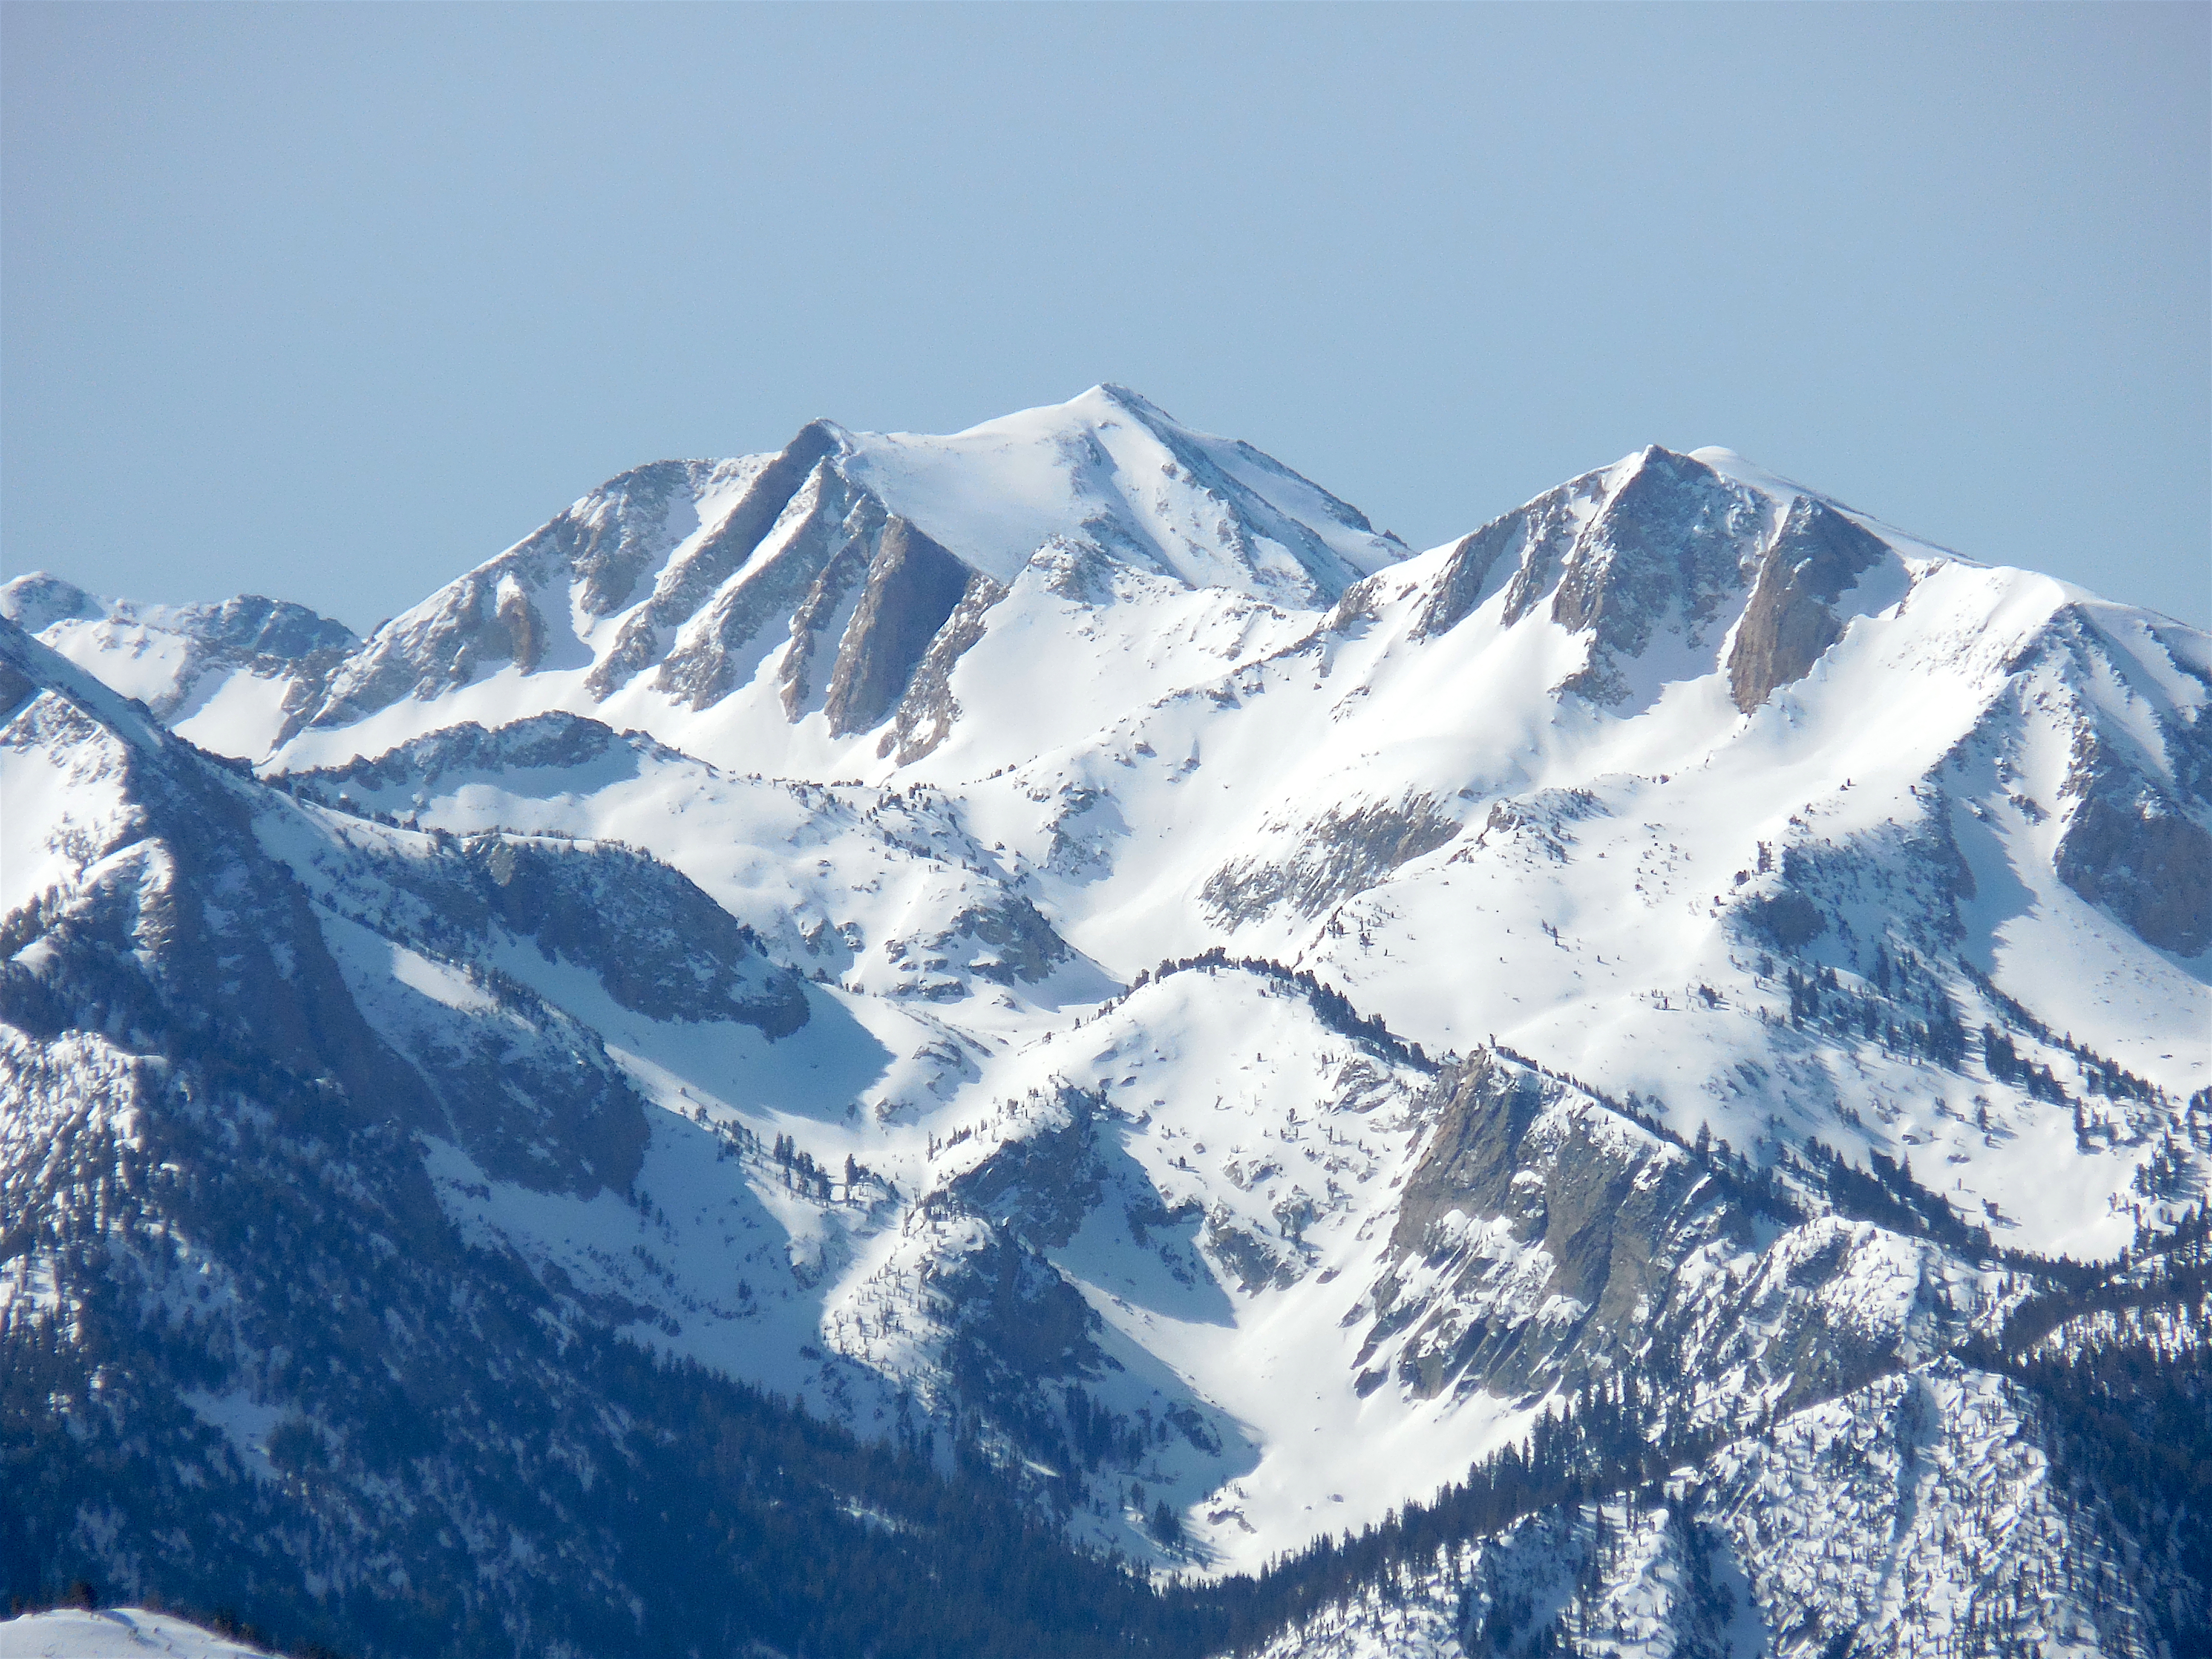 Looking south into the big mountains from the summit of Mammoth today. photo: snowbrains